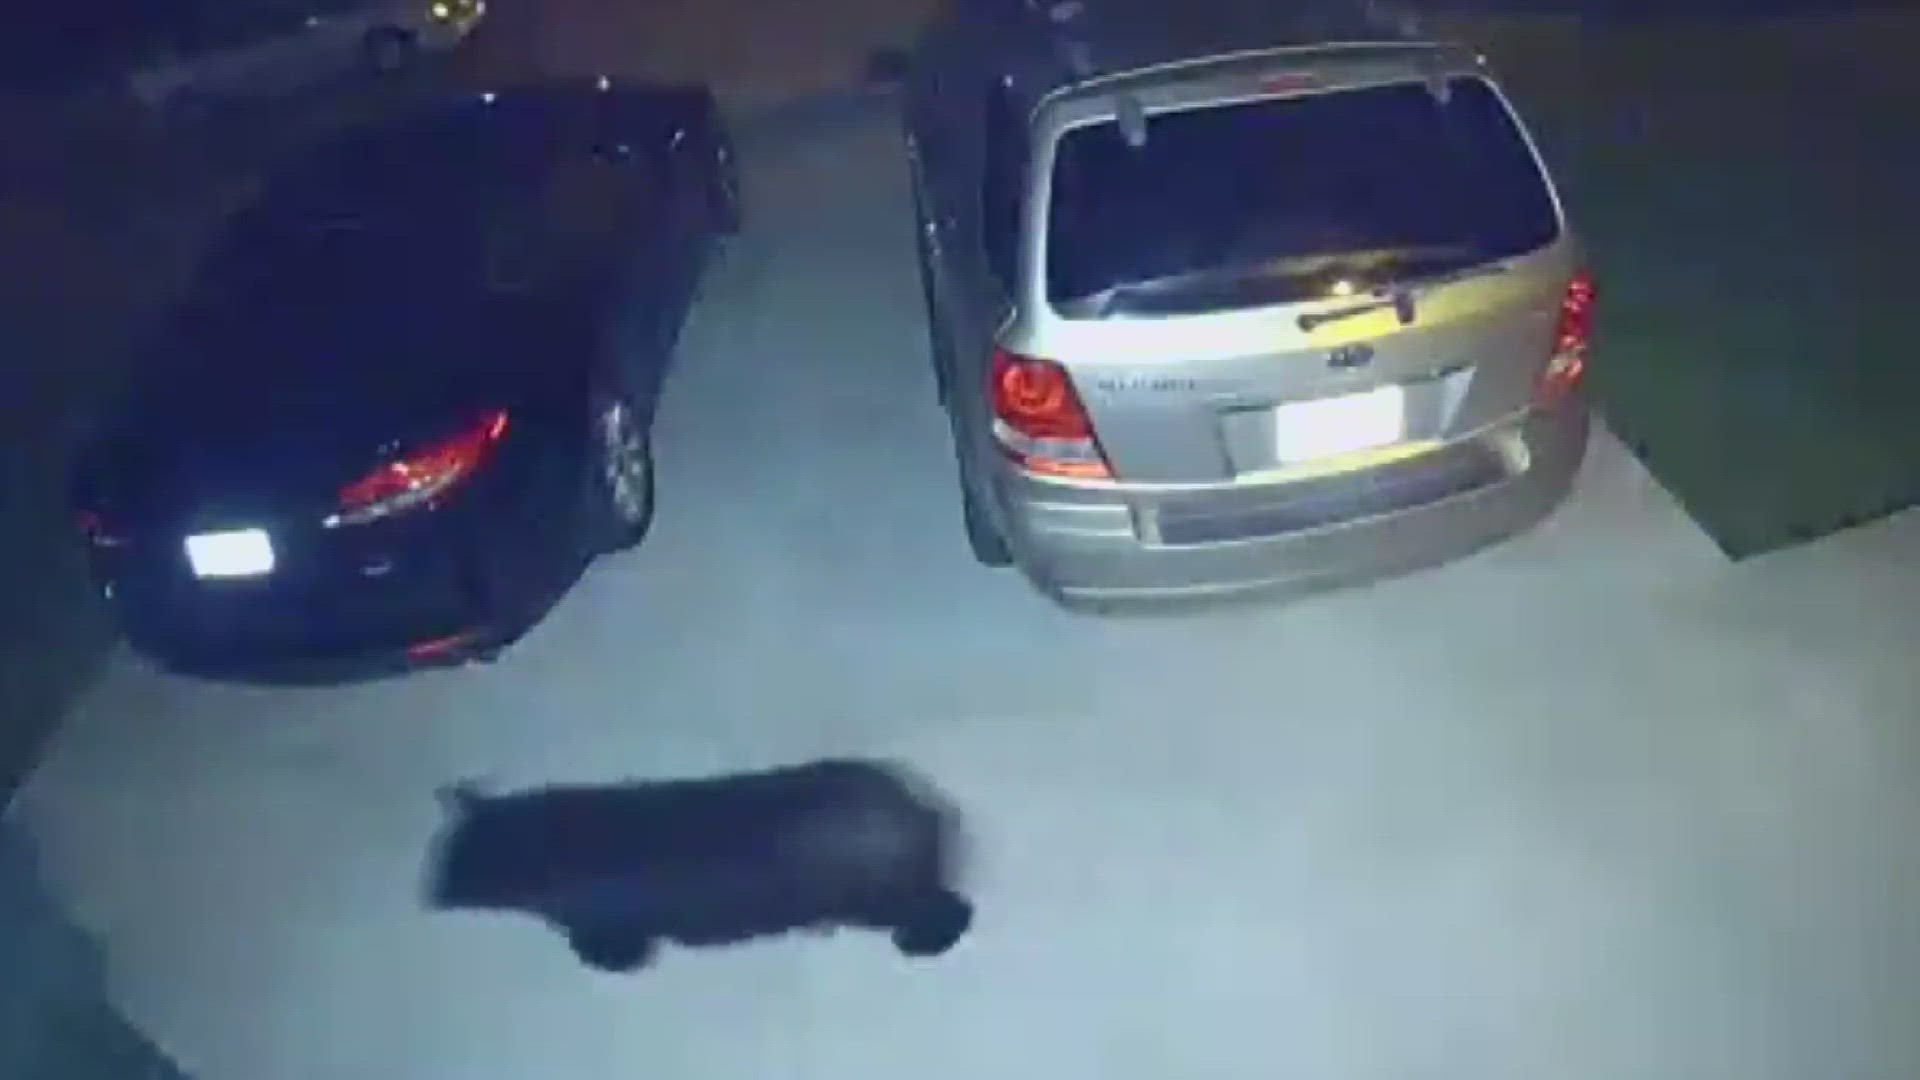 The black bear was captured on a Ring video camera at a residence near Three Creeks Metro Park just after midnight on June 24.